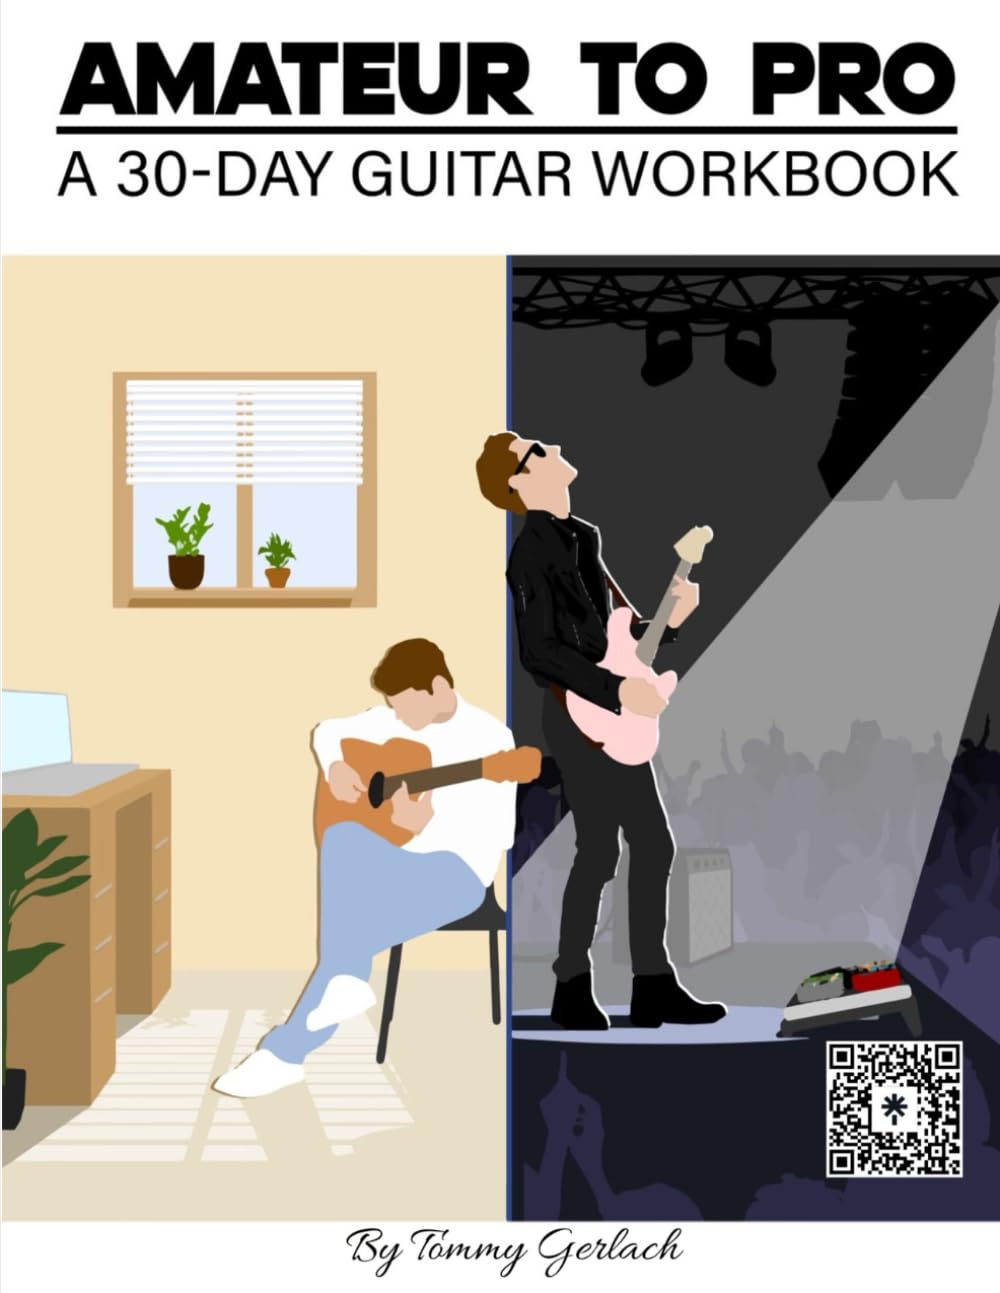 Amateur to Pro: A 30-Day Guitar Workbook